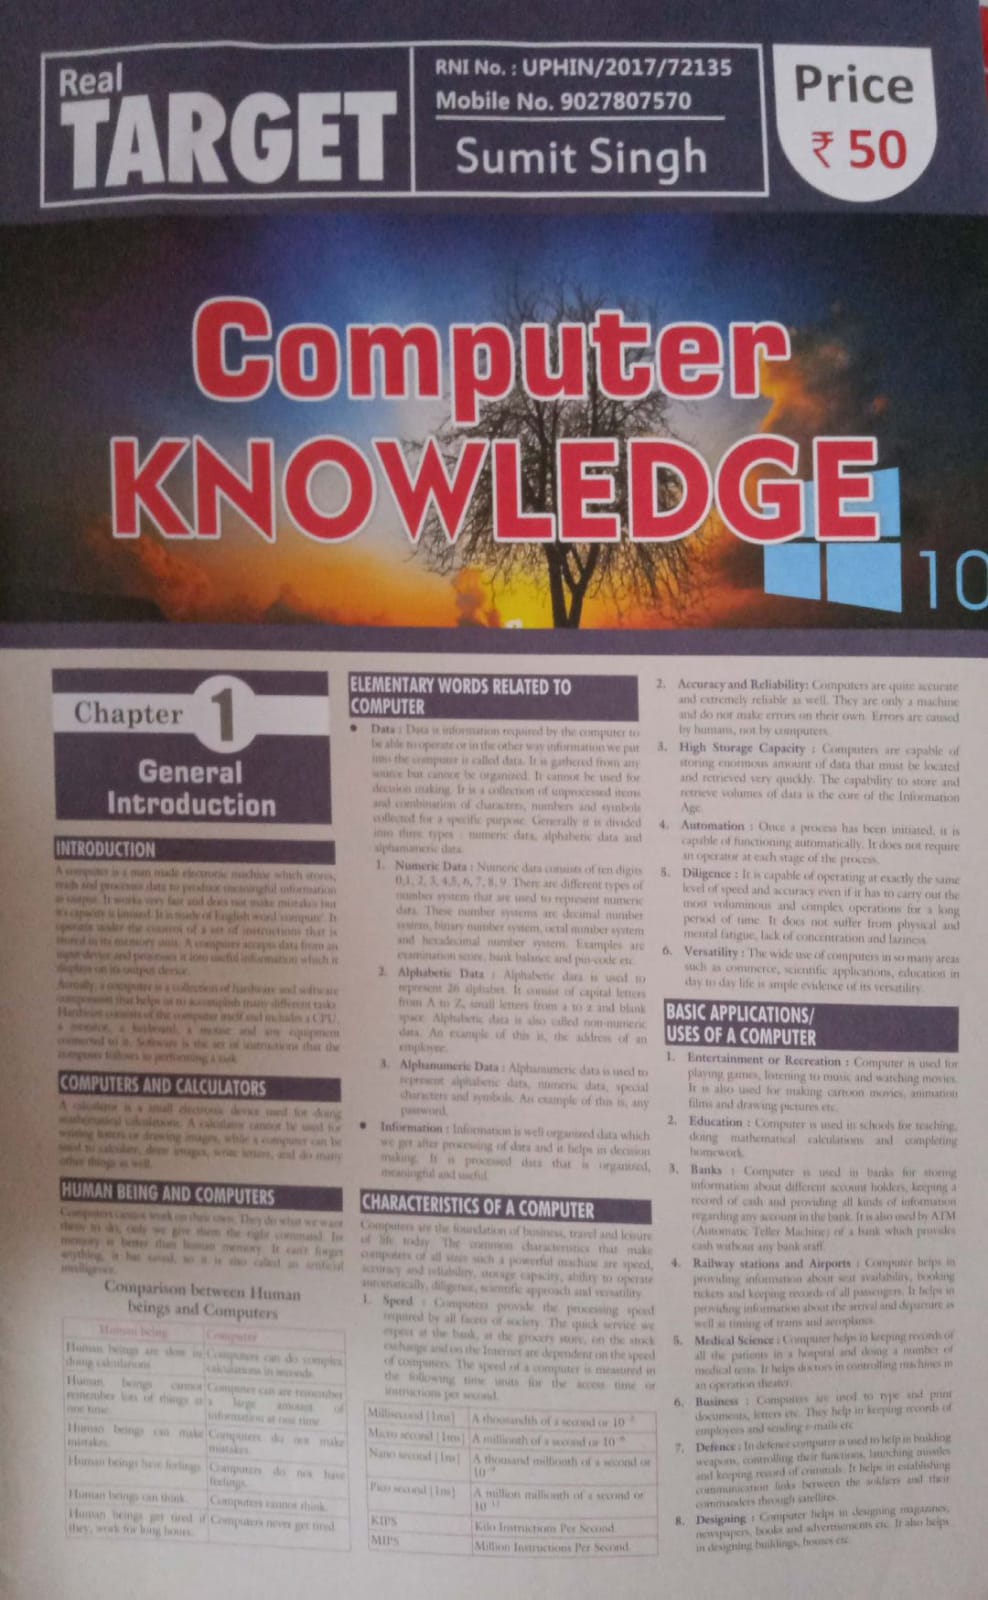 Real Target Computer Knowledge Chart Format by Sumit Singh[English Medium]